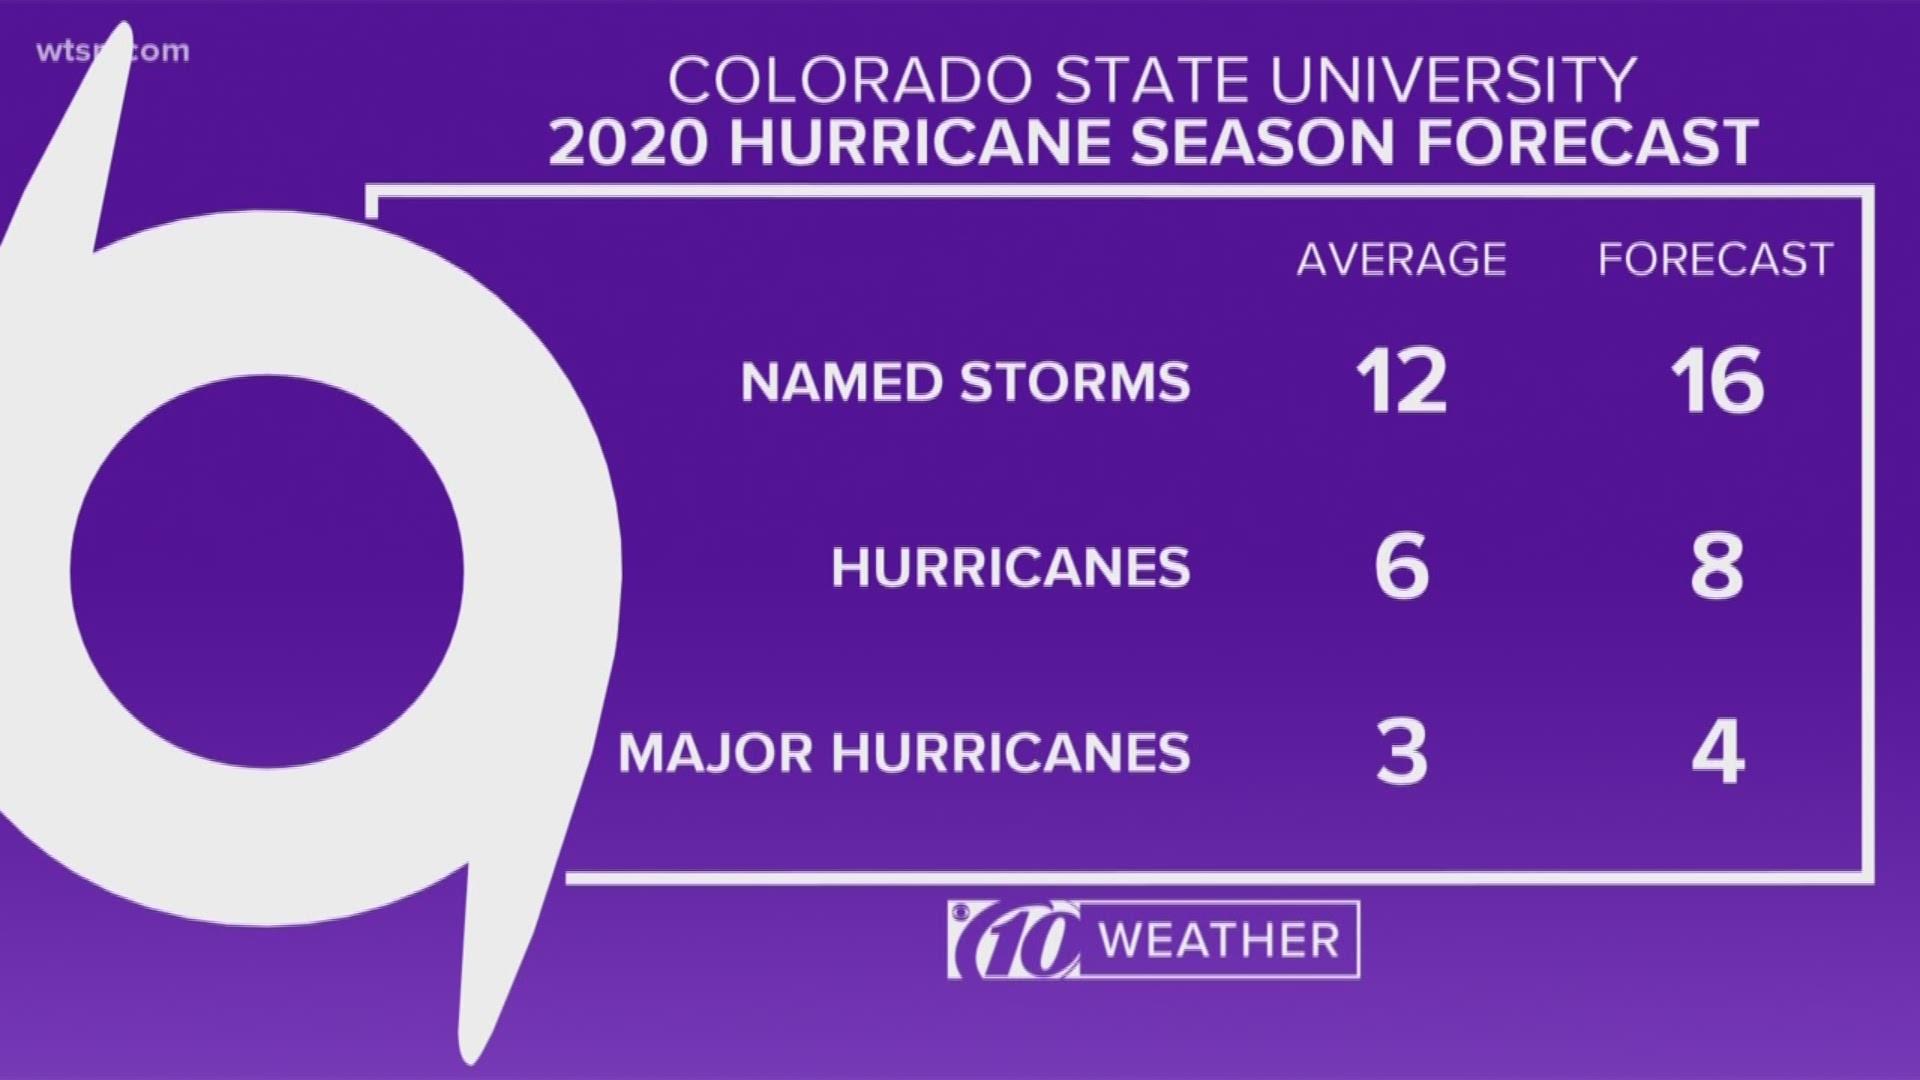 The Atlantic hurricane season begins June 1. Meteorologists are monitoring conditions to try and predict what type of hurricane season to expect.